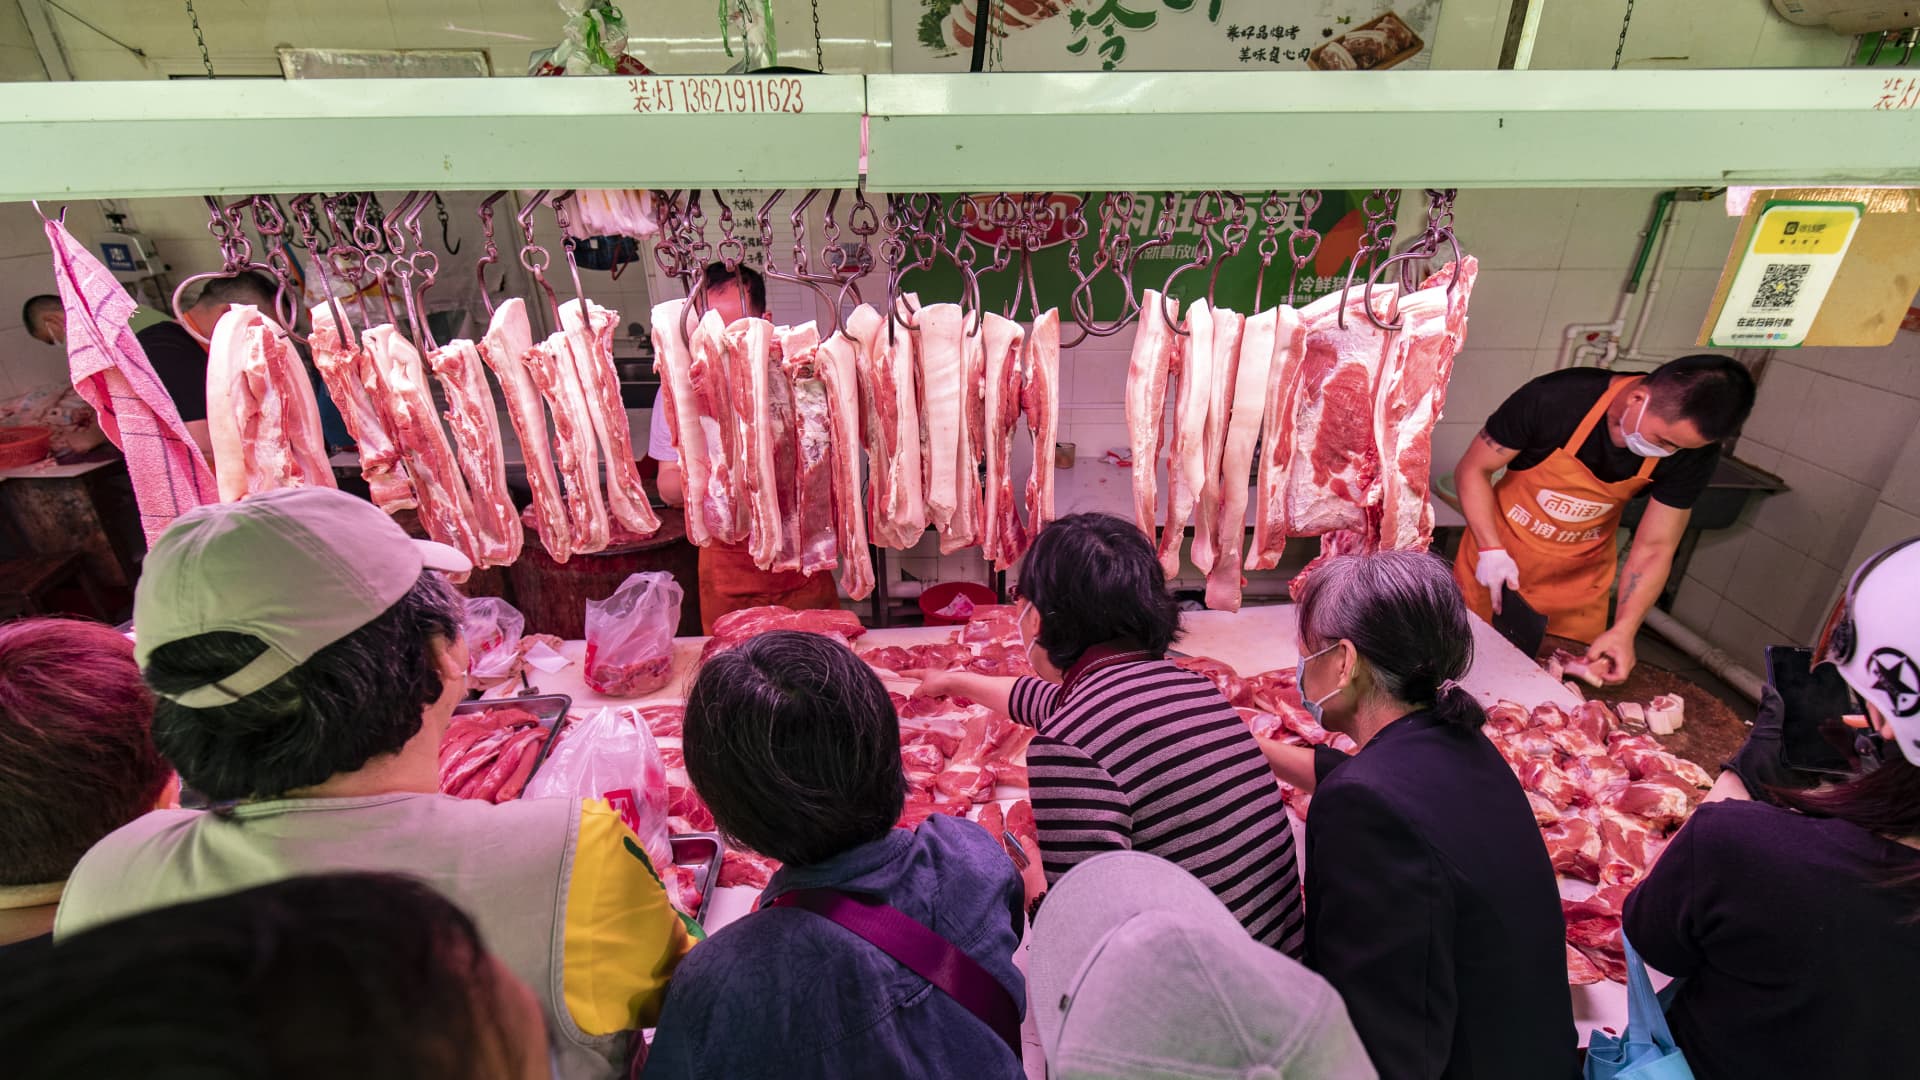 Customers buying pork at a food market in Shanghai, China. Prices of pork, a food staple in China, rose by 20.2% in July 2022 compared to a year ago, official data showed.